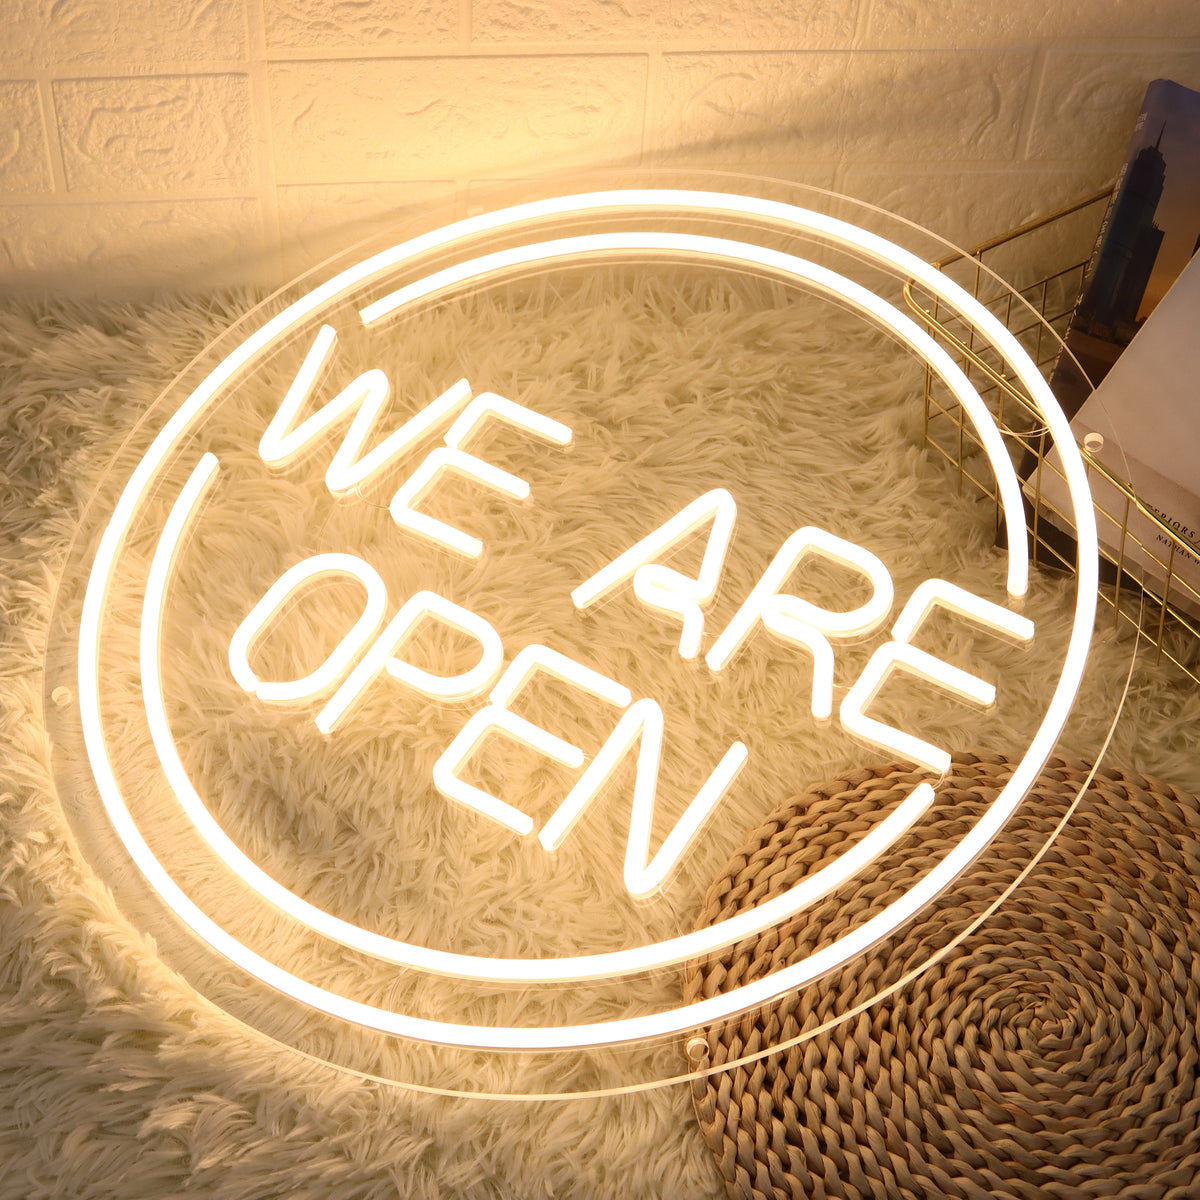 We Are Open Neon Sign Shop&Bar Open Led Sign